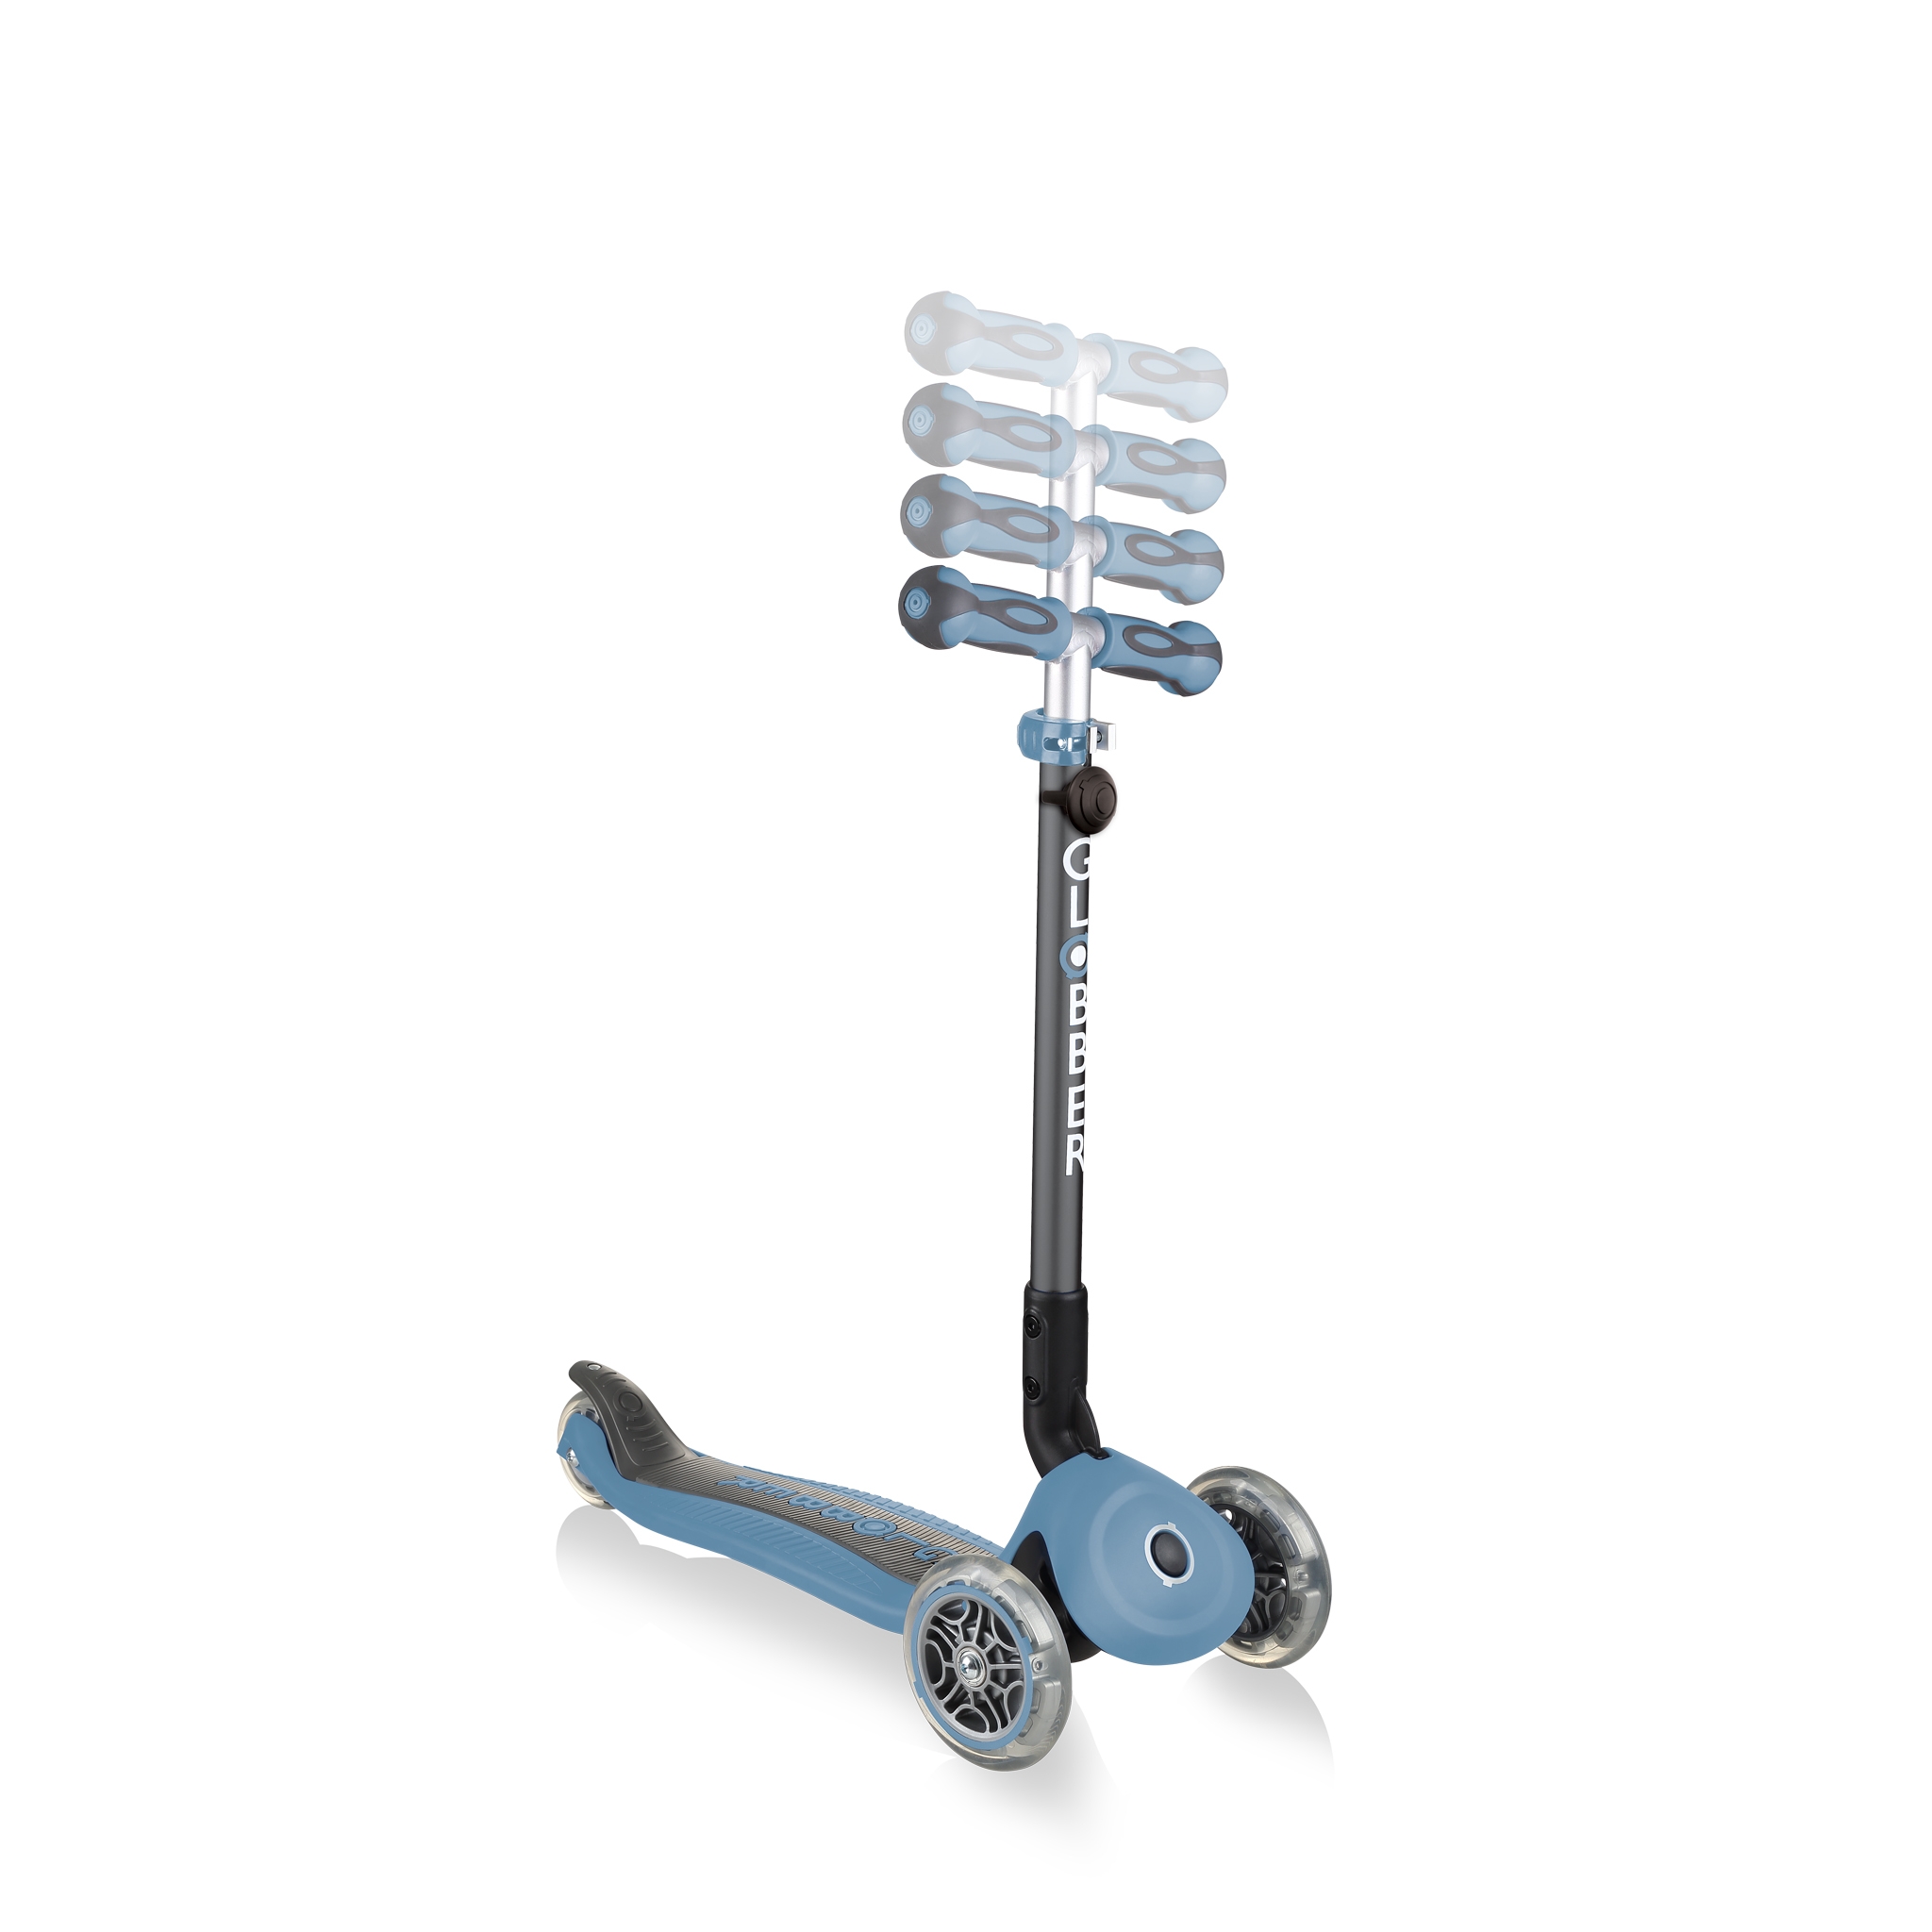 GO-UP-DELUXE-GO-UP-DELUXE-ride-on-walking-bike-scooter-with-4-height-adjustable-T-bar-ash-blue 4